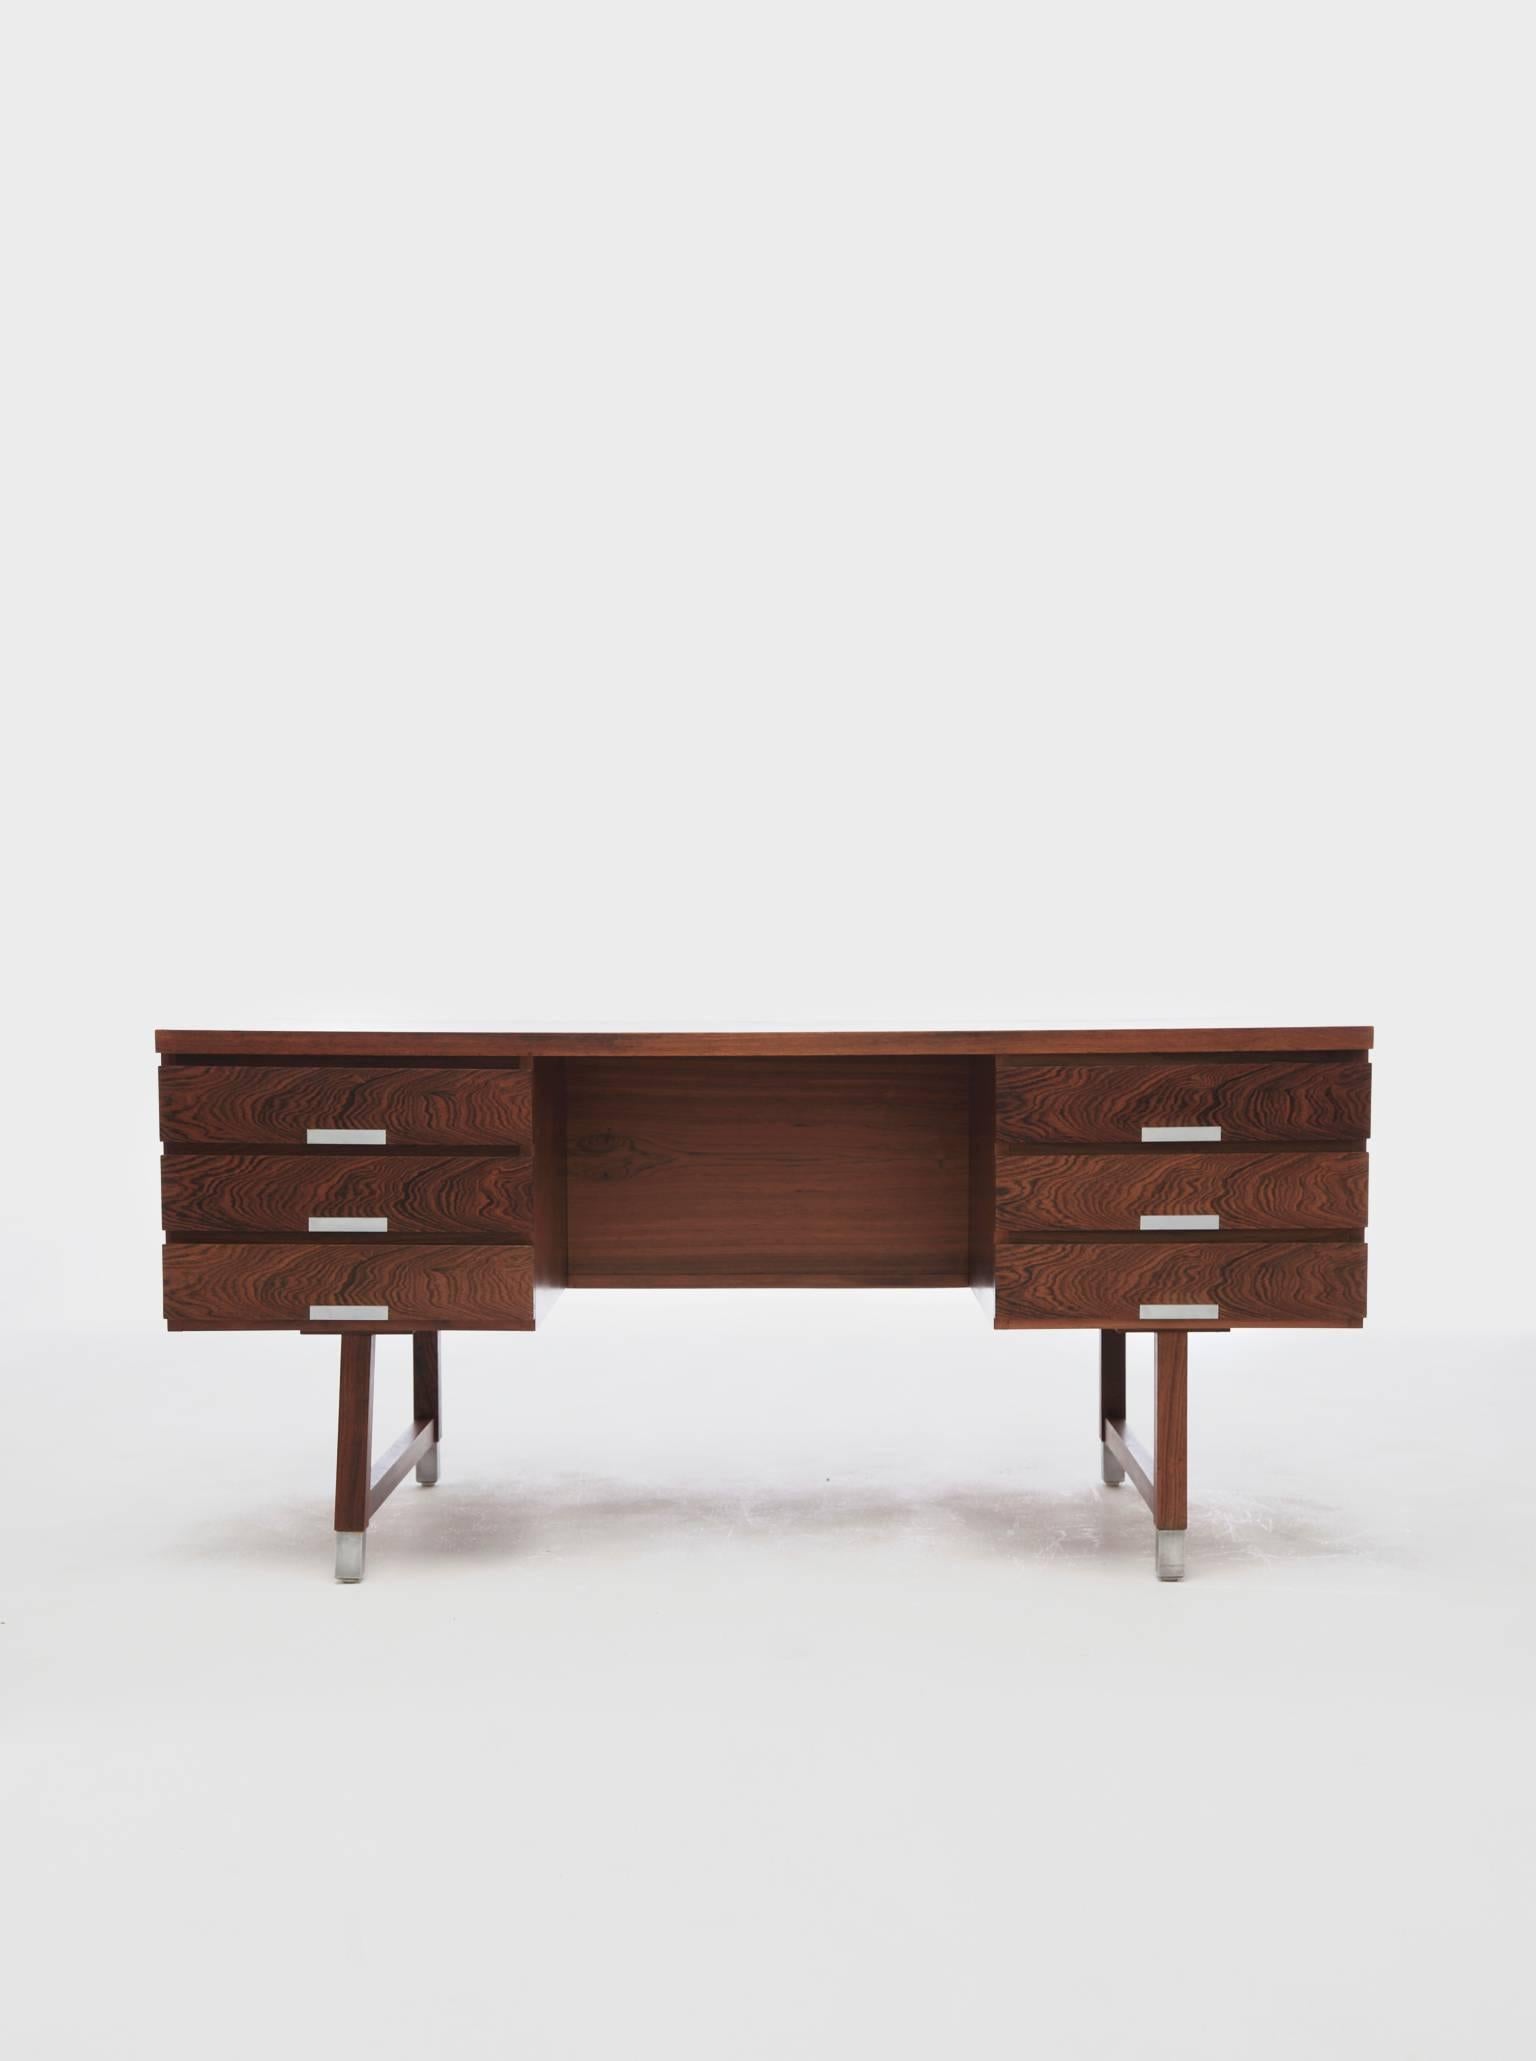 Mid-Century rosewood writing desk by Kai Kristiansen, 1960s, Denmark. Front with six drawers, reverse side with shelves. Aluminium handles and shoes. In great original condition, some shading to top. Ships worldwide.

